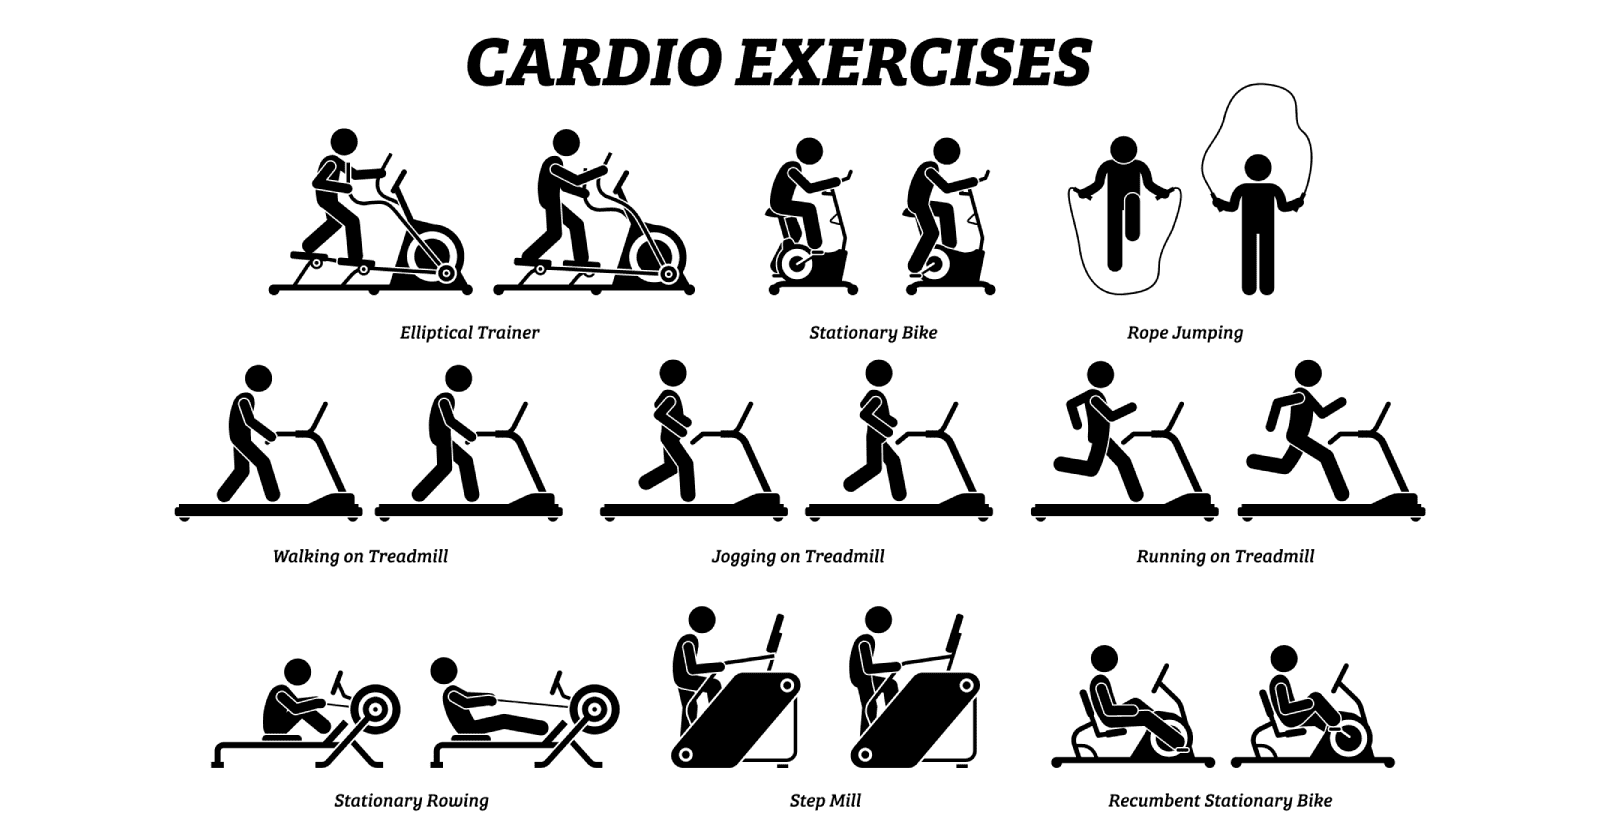 Cardio exercises for weight loss